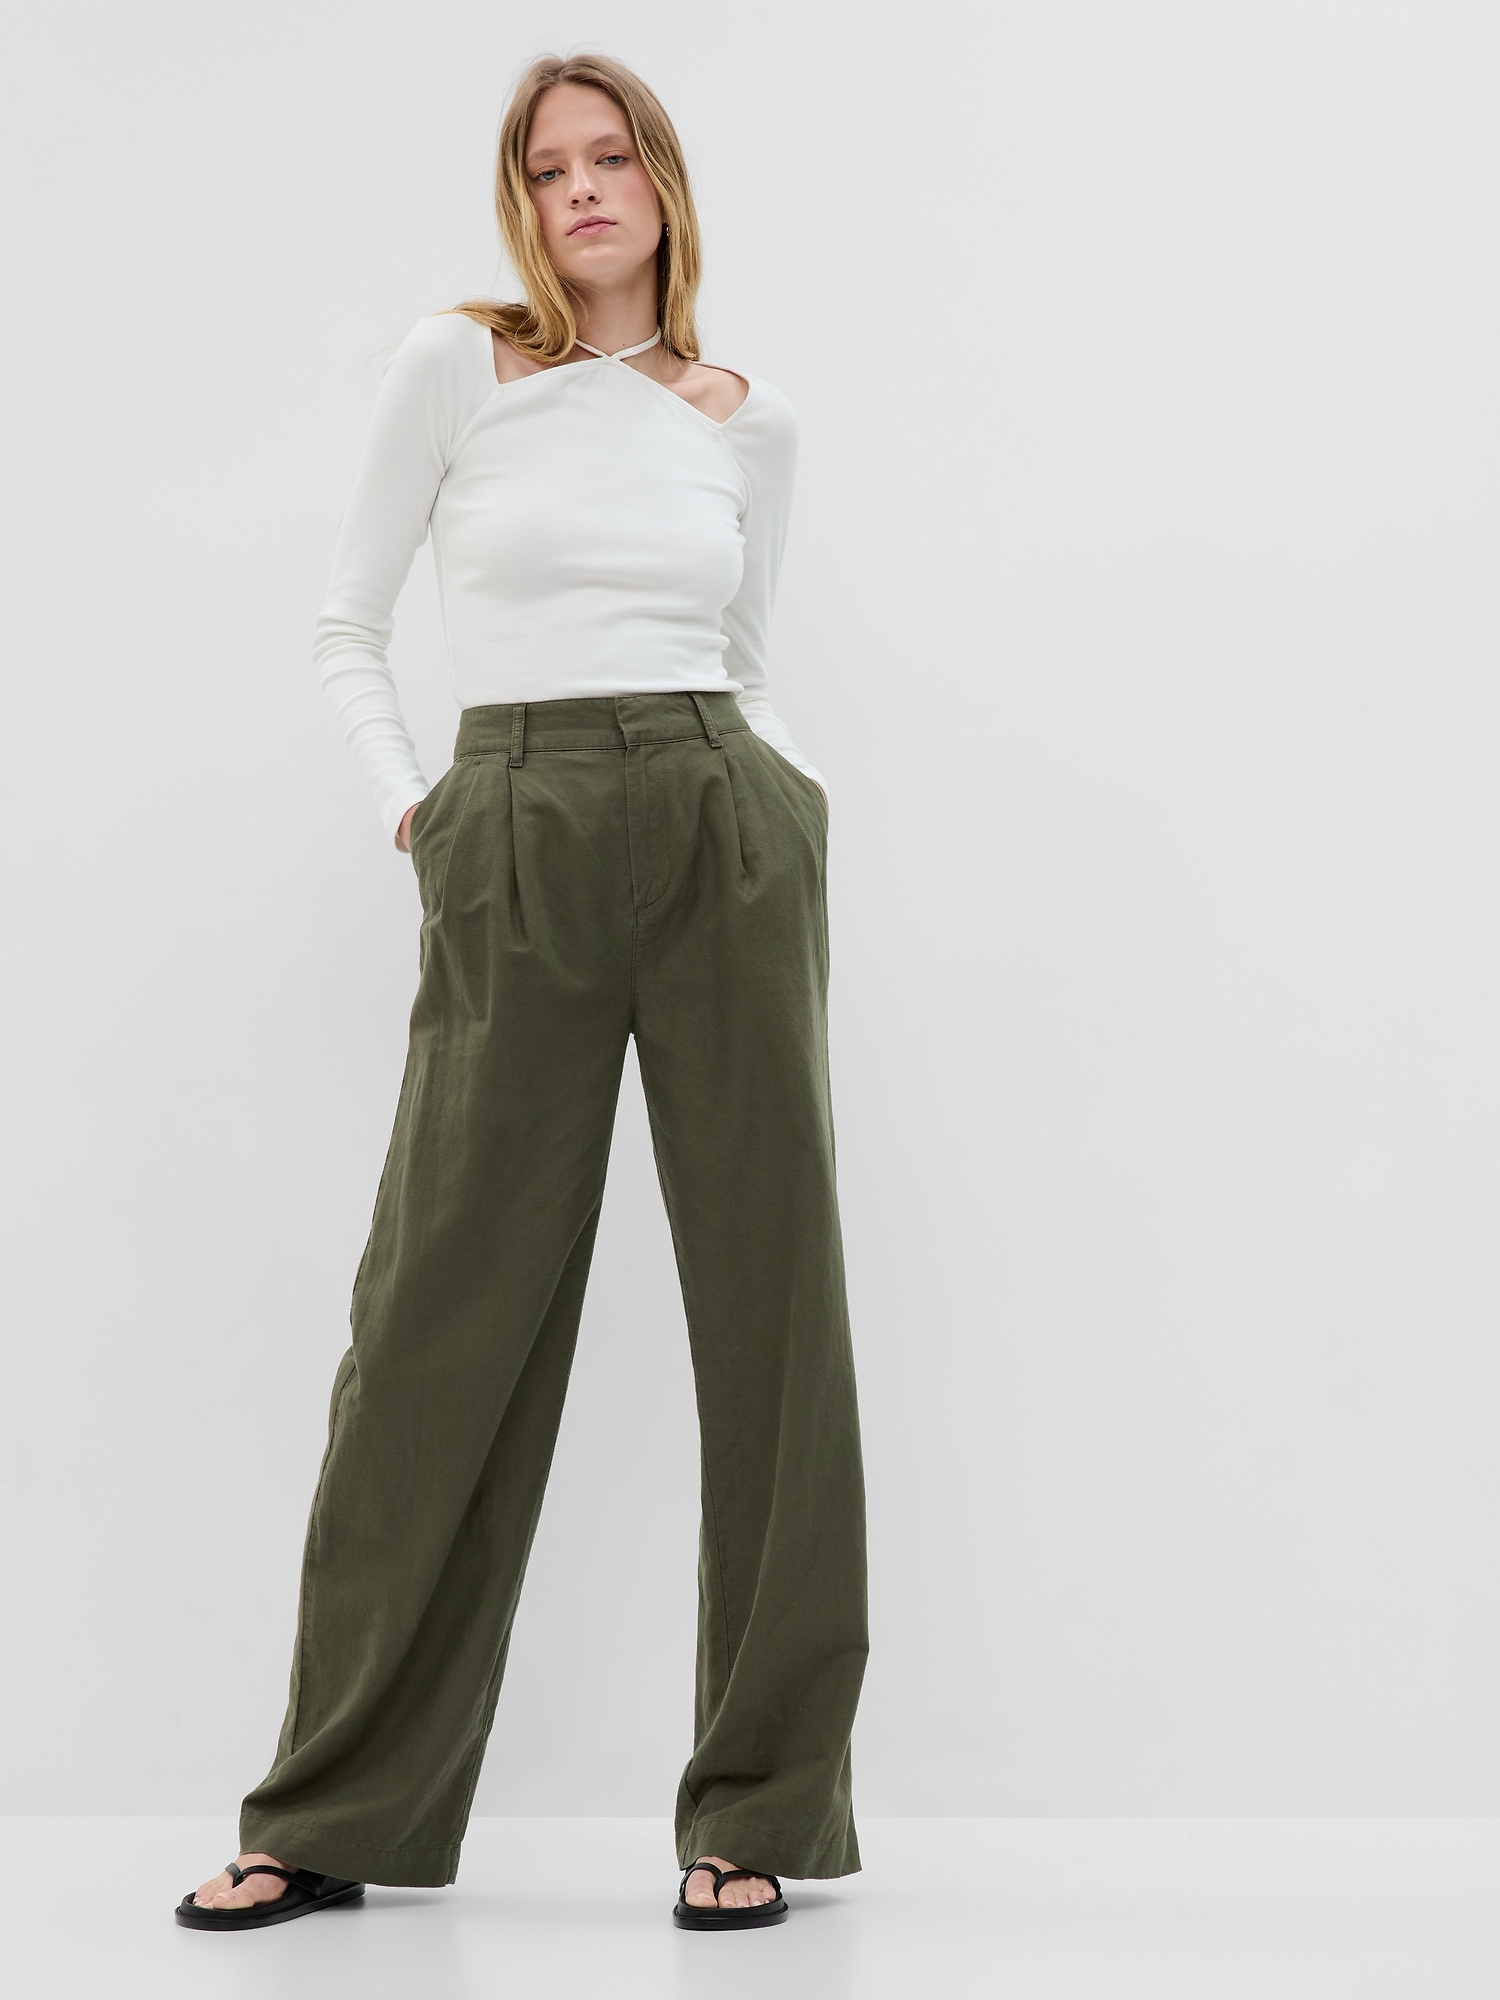 Buy Gap 90's Loose Chinos from the Gap online shop